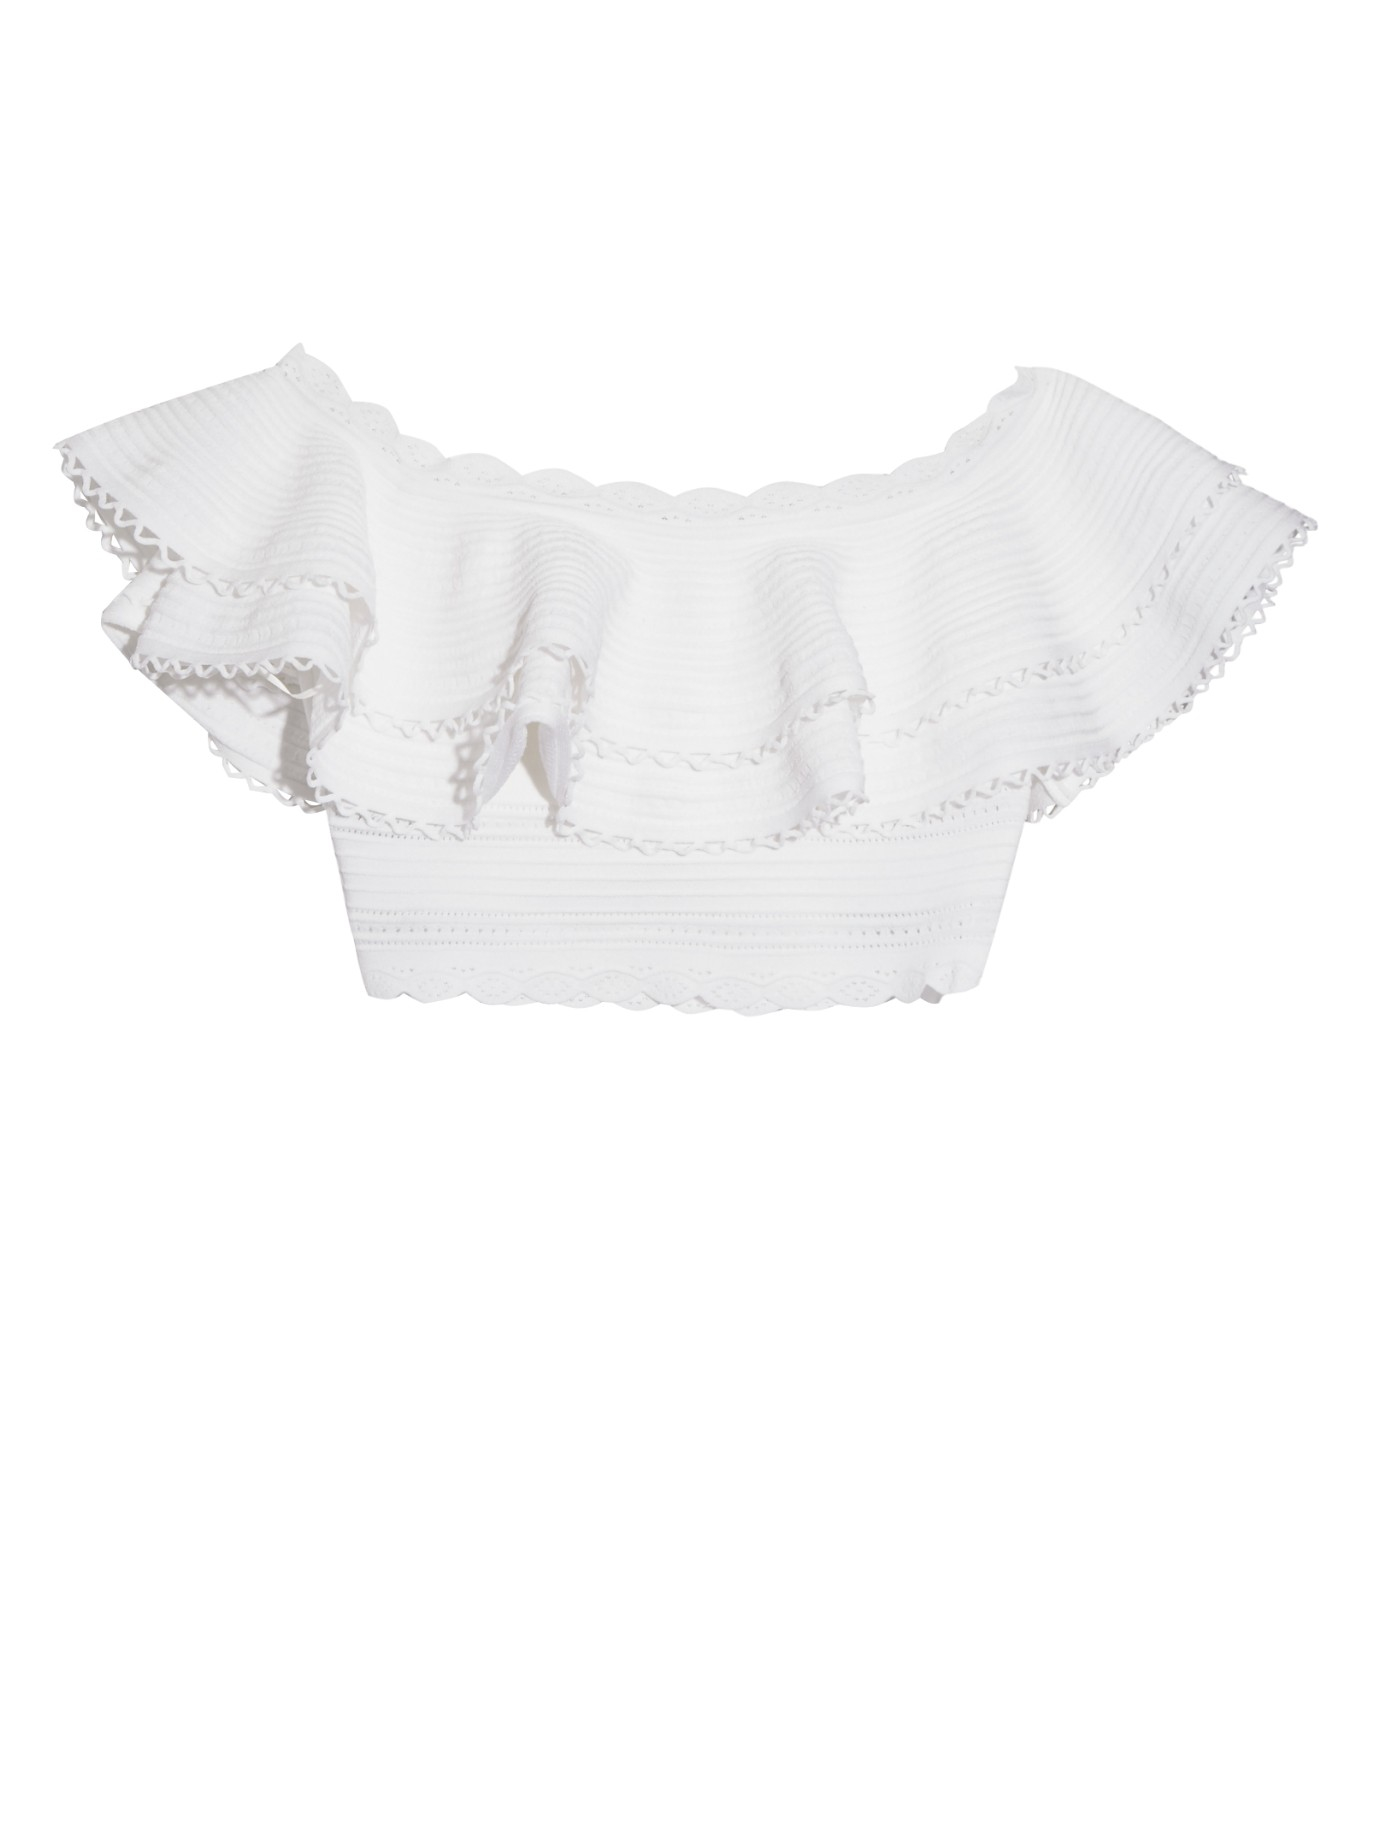 Alexander mcqueen Ruffled Off-the-shoulder Cropped Top in White | Lyst